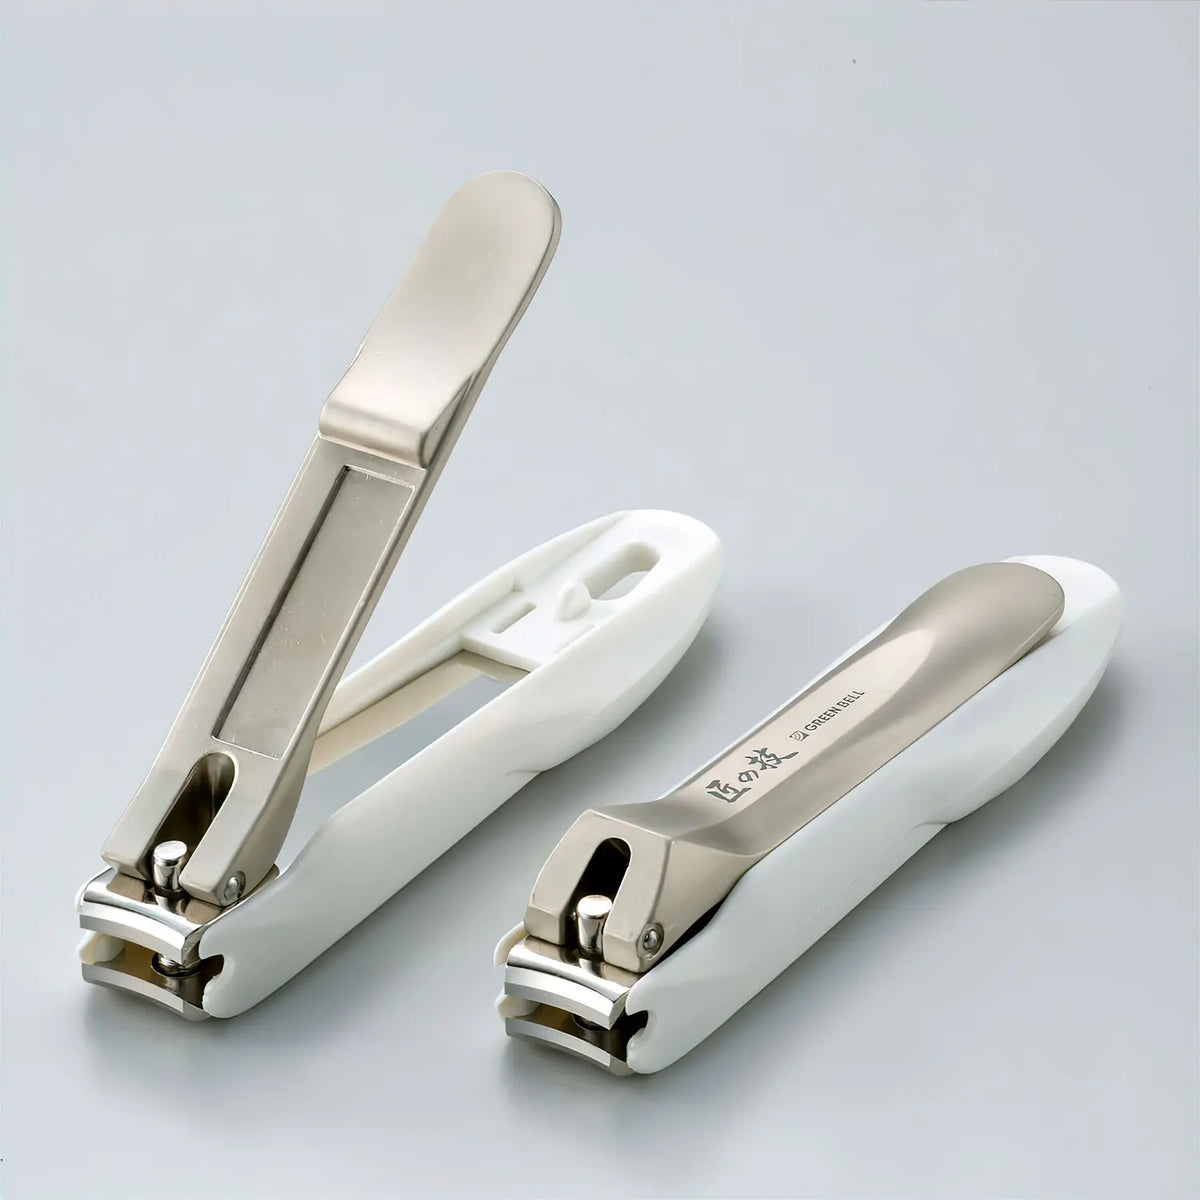 Green Bell Takuminowaza Stainless Steel Nail Clippers